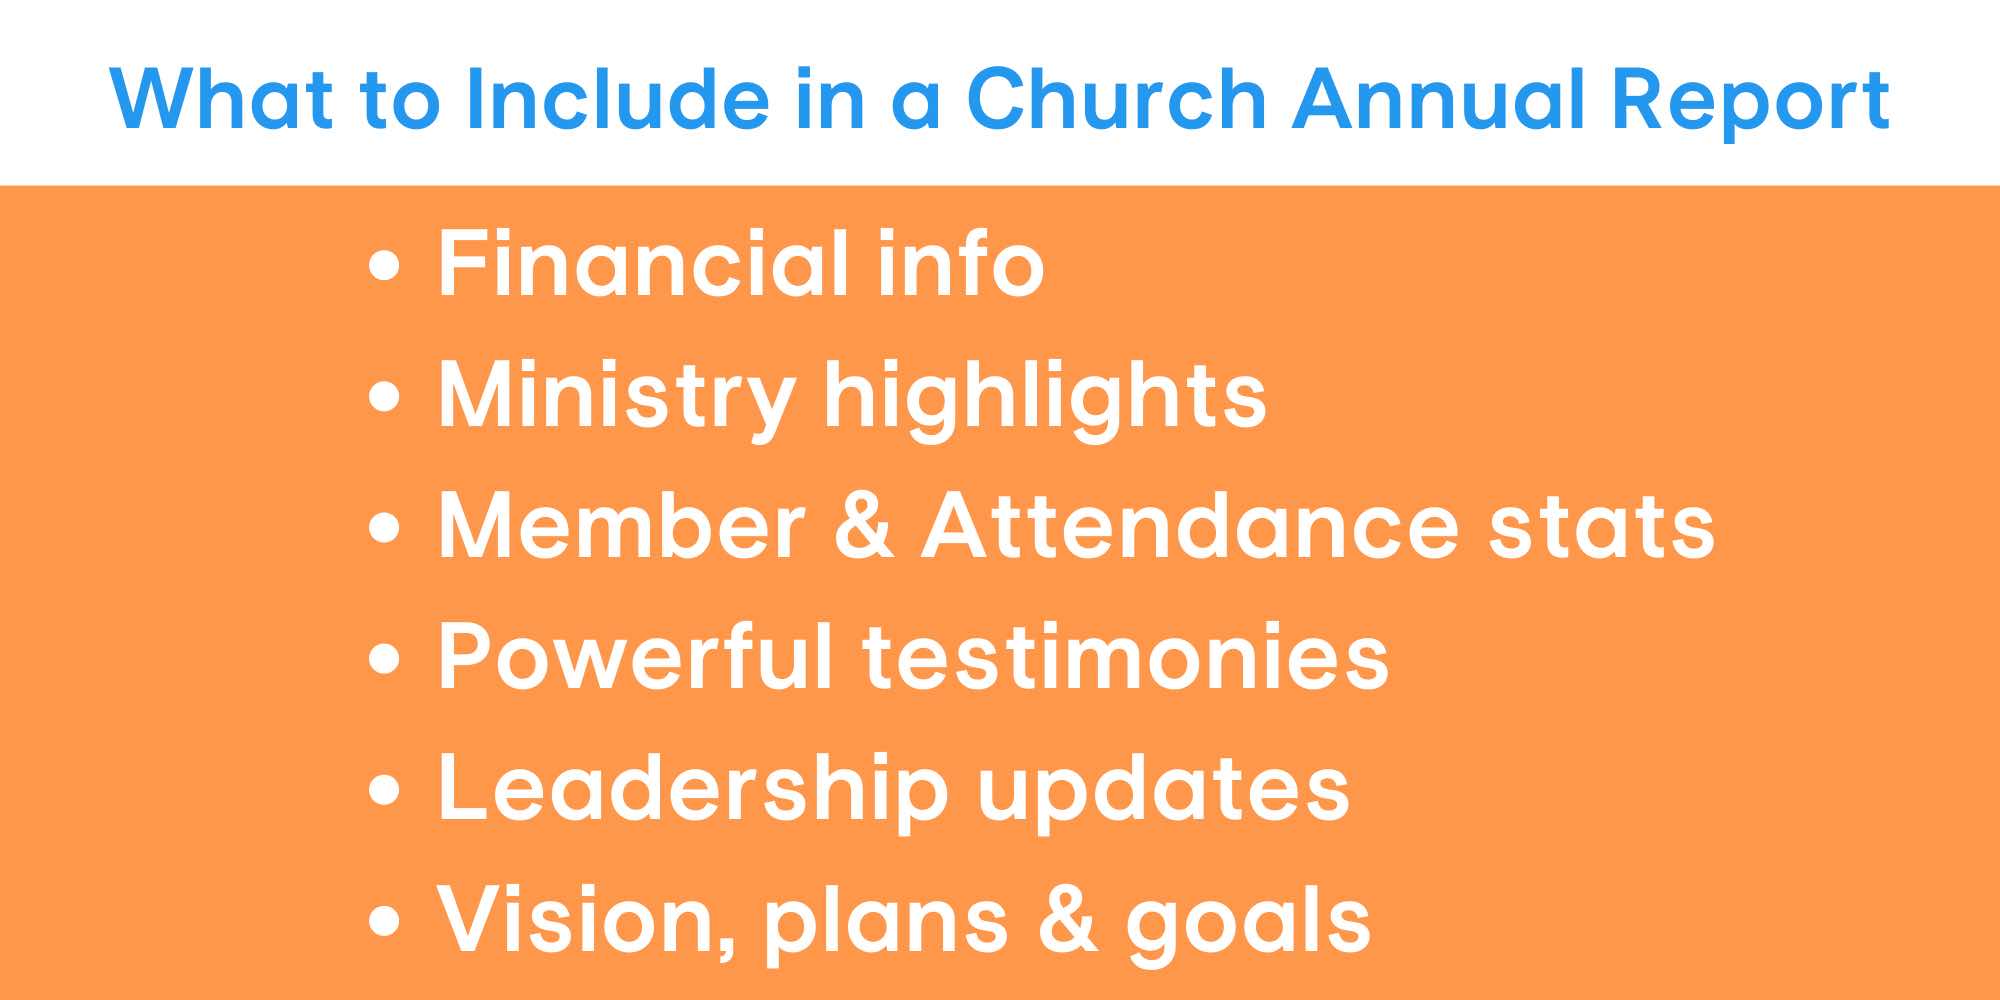 Your church annual report should include financial info, ministry highlights, membership statistics, testimonies, leadership updates, and the church's vision and goals